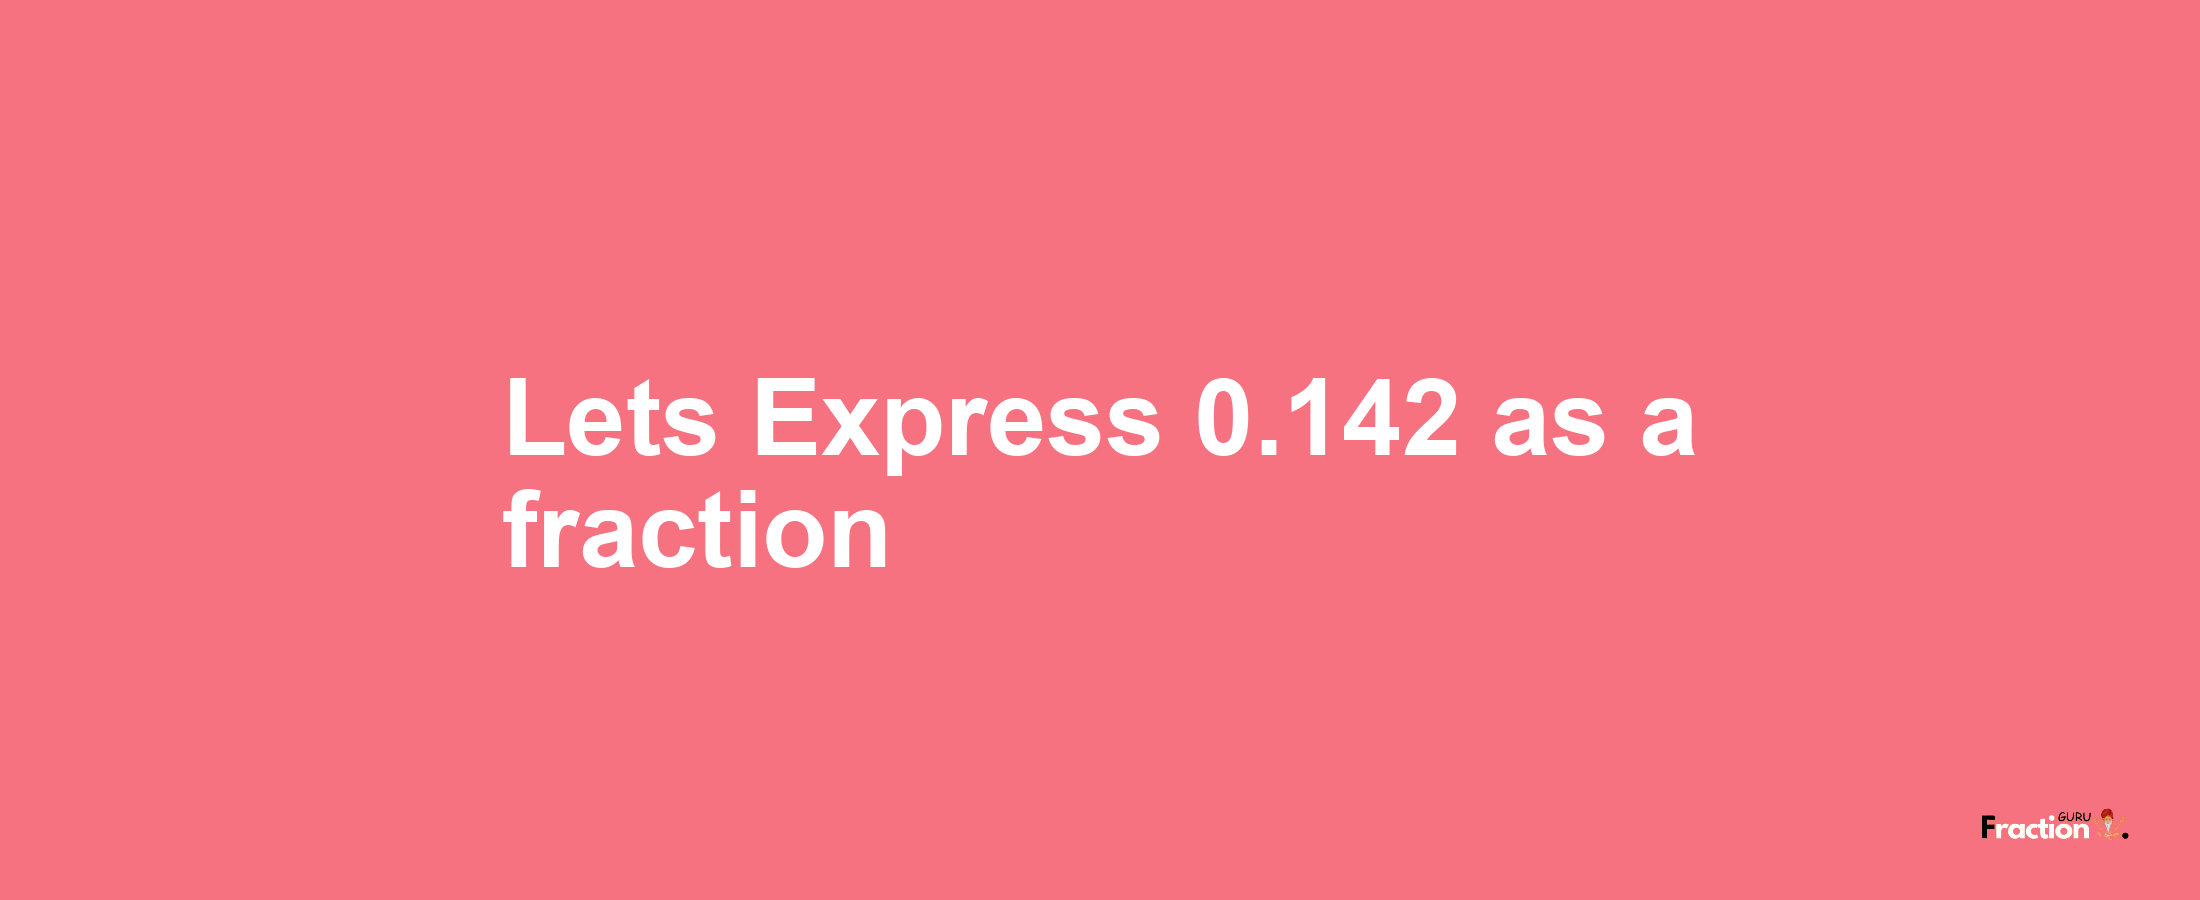 Lets Express 0.142 as afraction